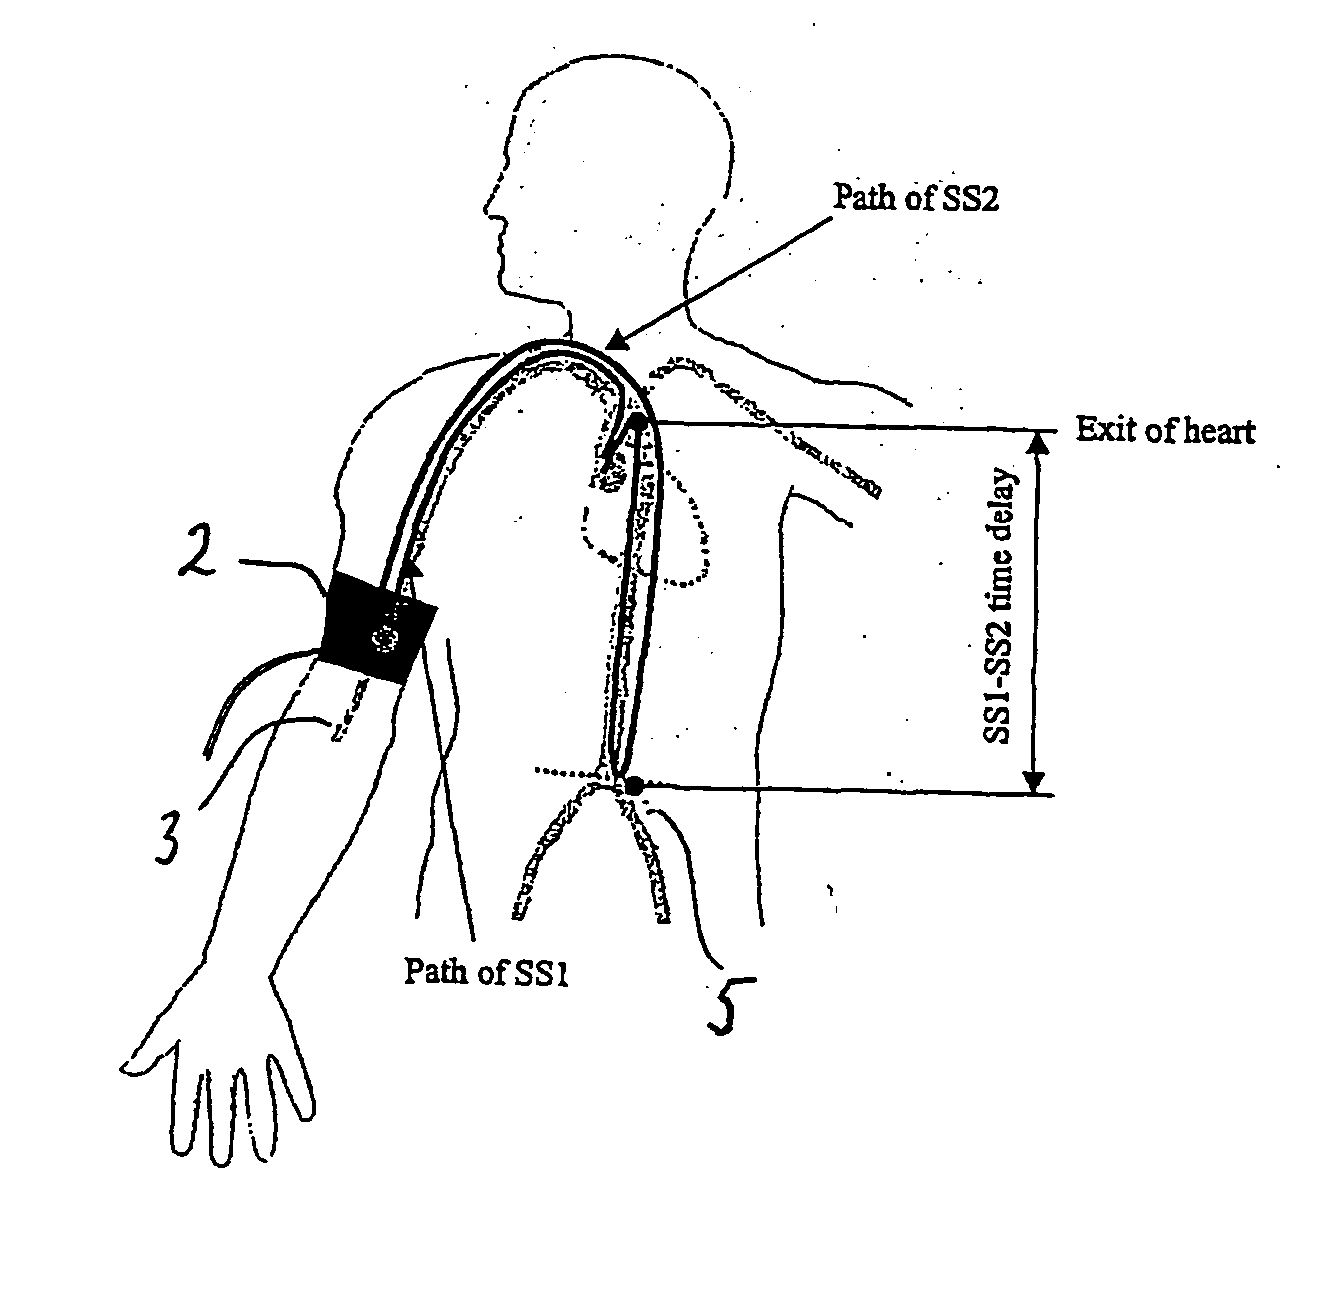 System and method for non-invasive cardiovascular assessment from supra-systolic signals obtained with a wideband external pulse transducer in a blood pressure cuff